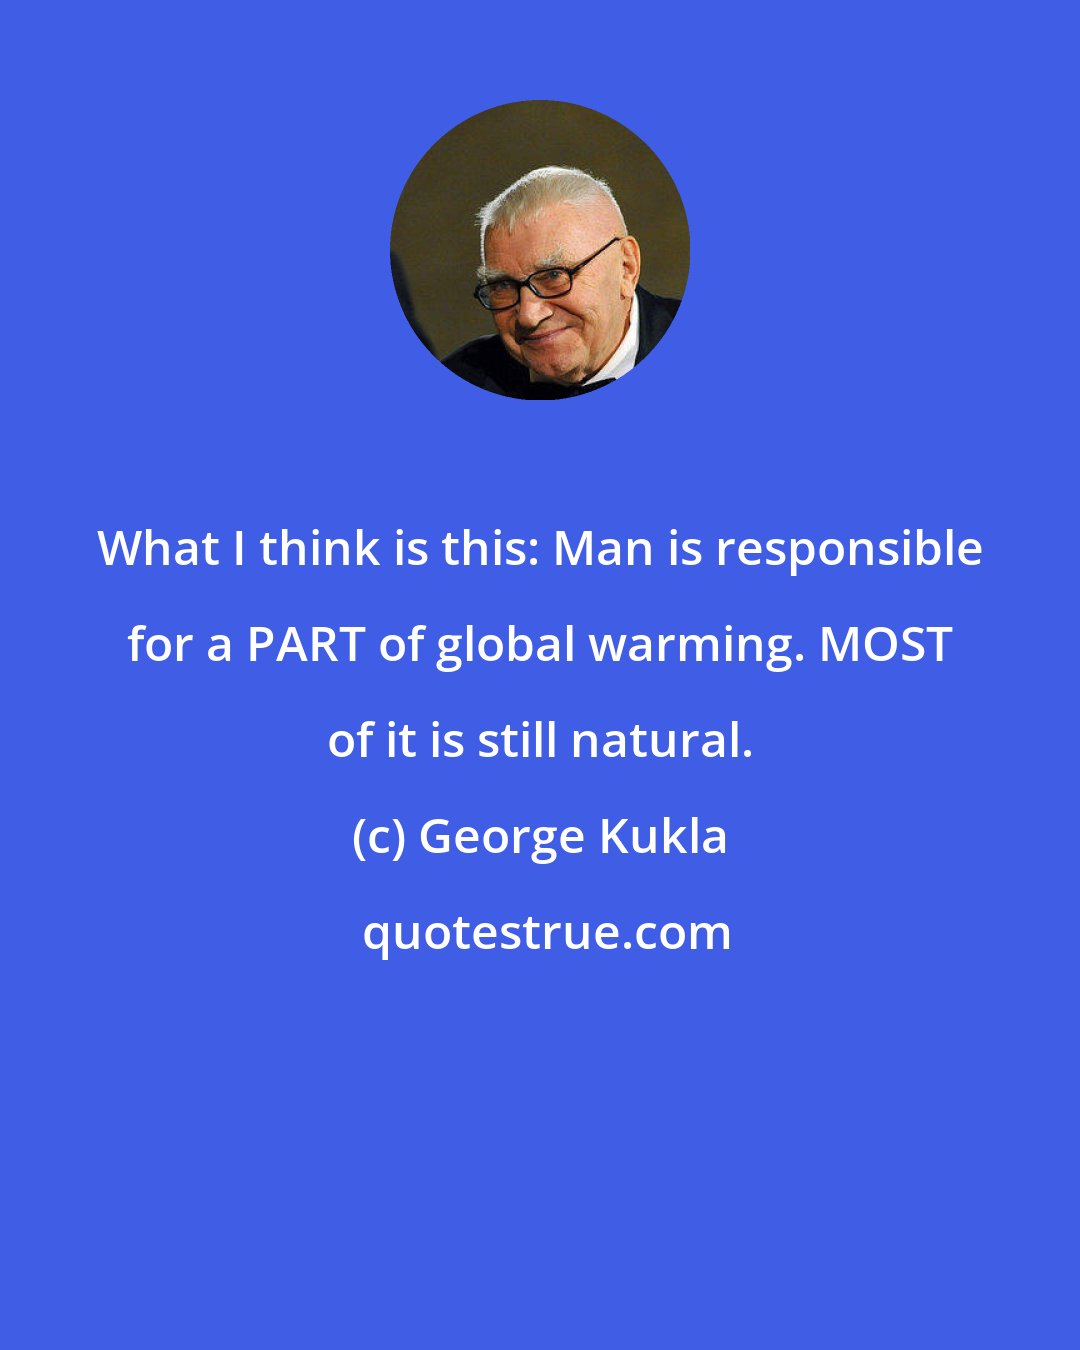 George Kukla: What I think is this: Man is responsible for a PART of global warming. MOST of it is still natural.